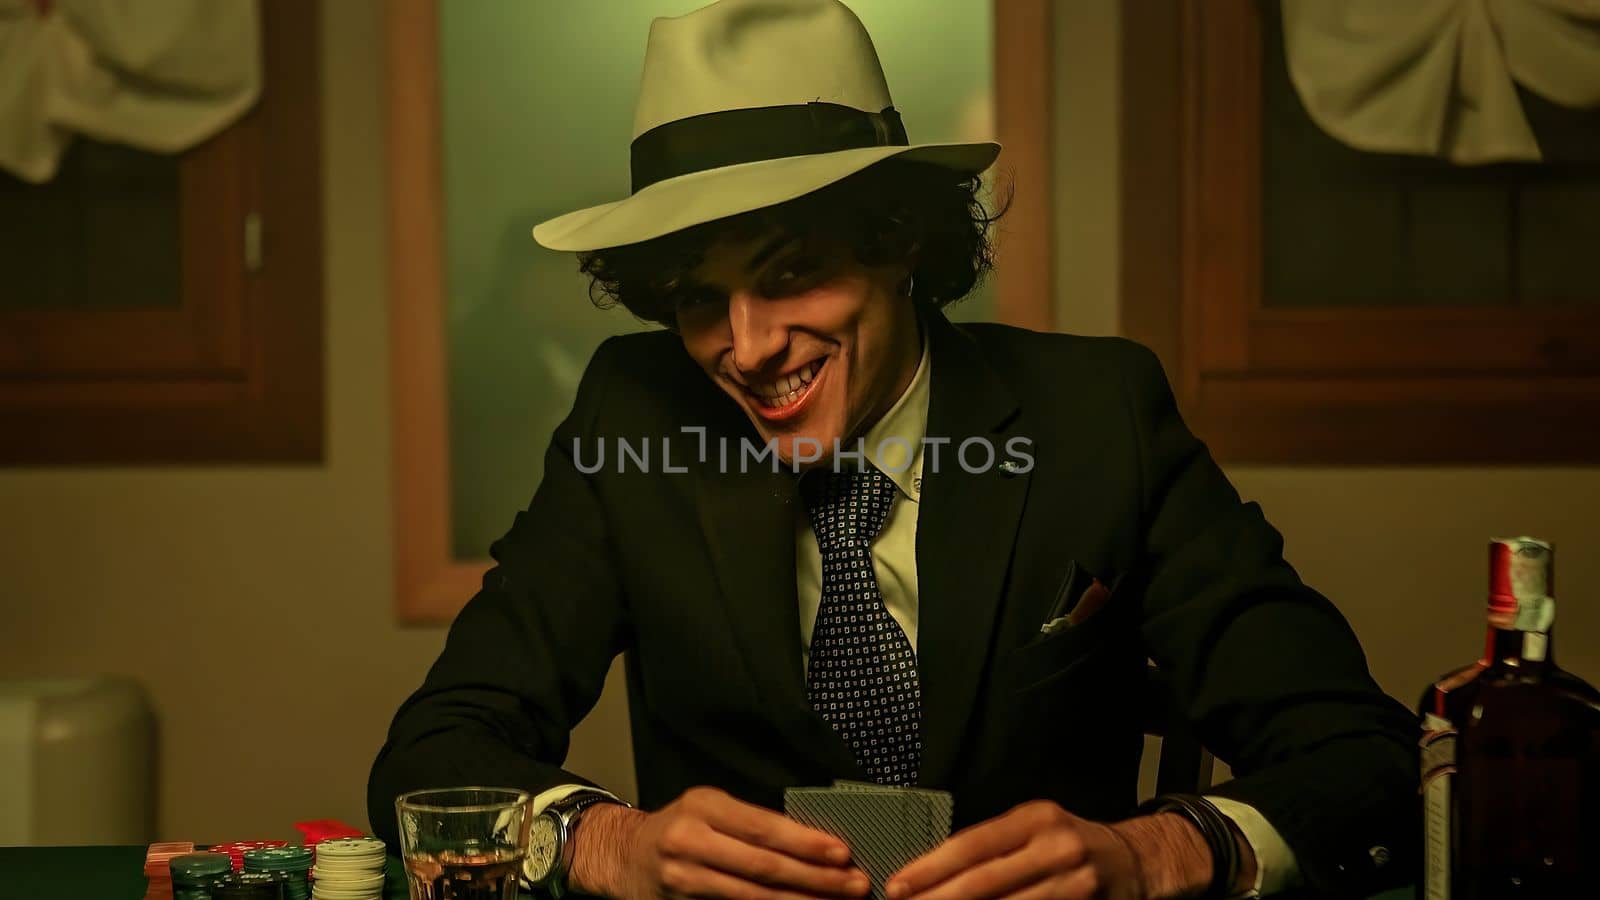 An intense shot of a poker player with cards in hand. He confidently laying them down on the table. The player's facial expression, conveying a sense of cunning and deception.